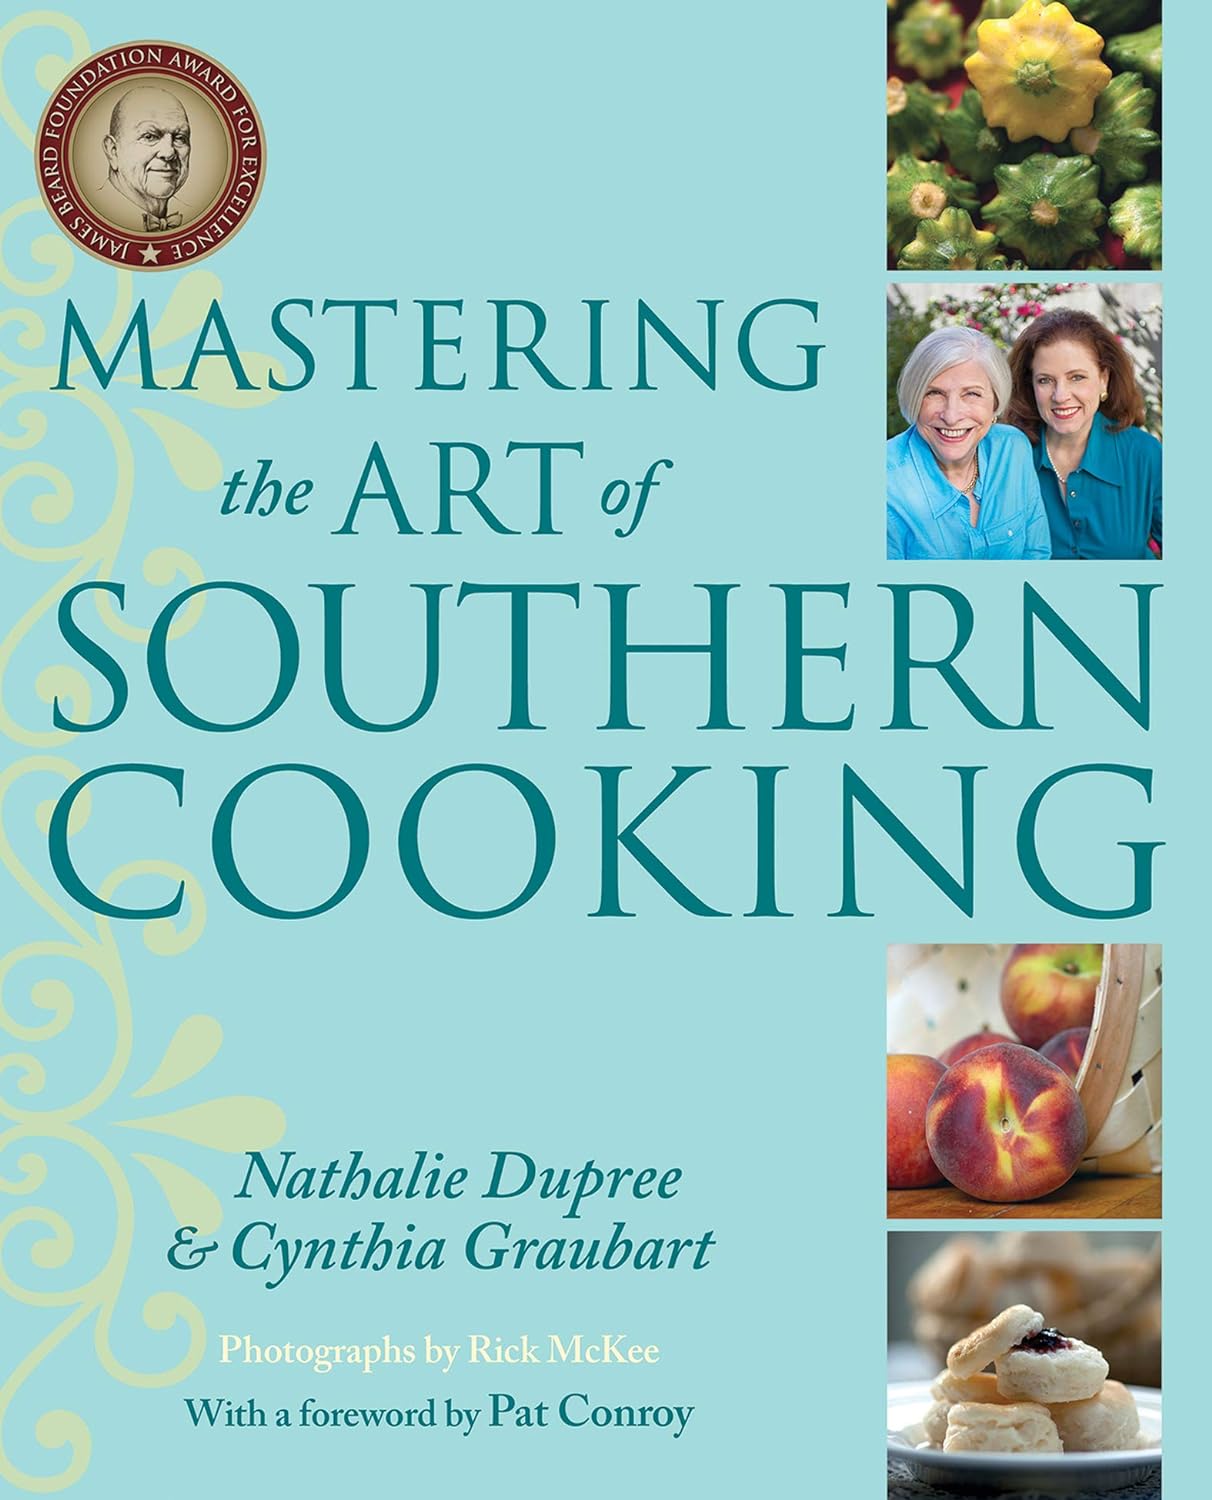 Mastering the Art of Southern Cooking (Kindle Edition) $2.99